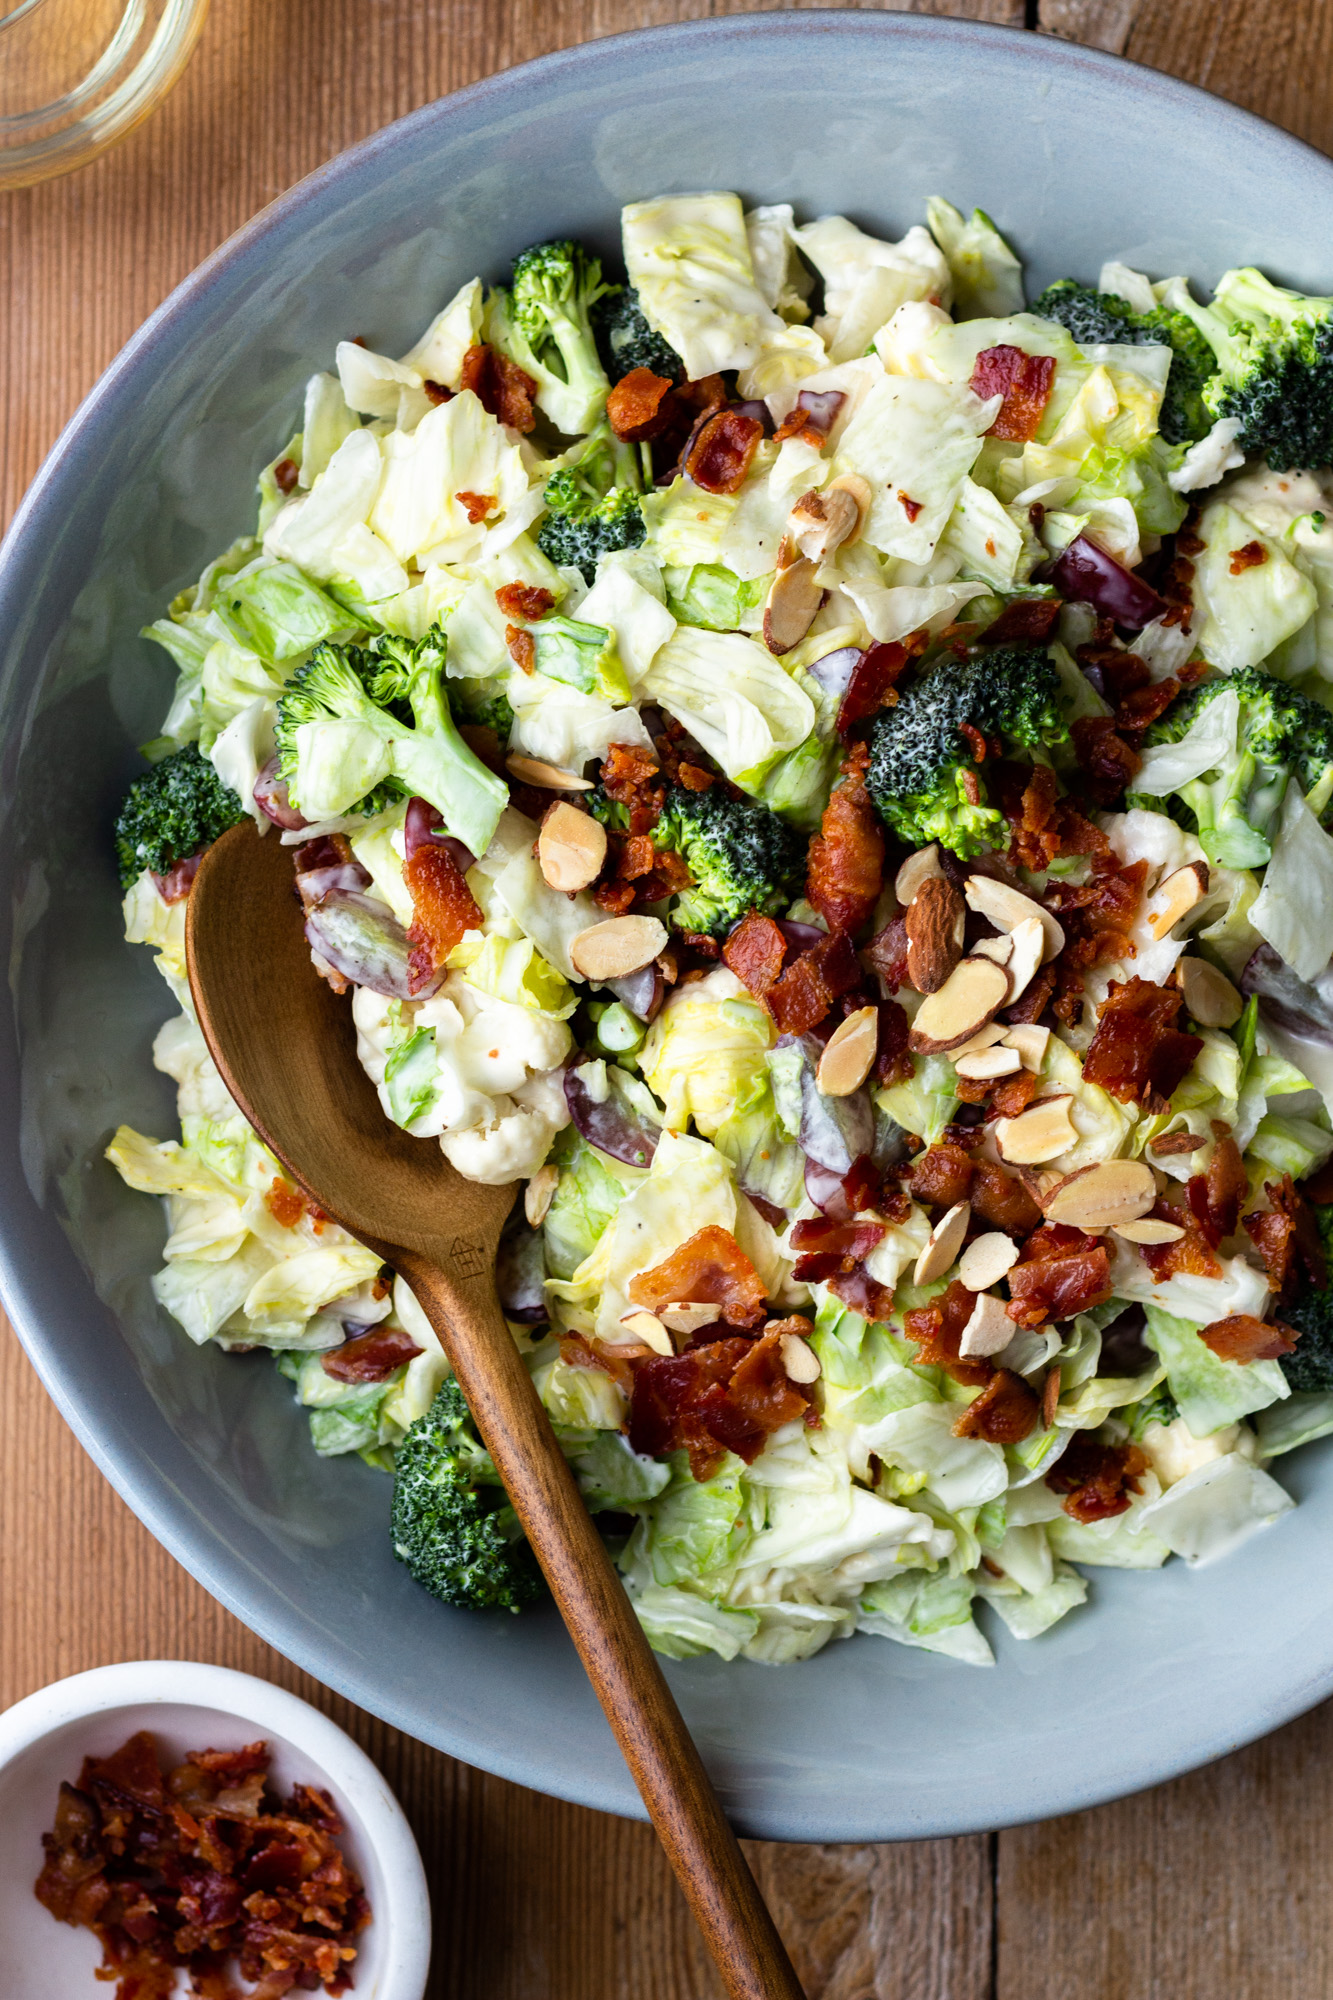 Easy and delicious side salad packed with veggies, bacon, grapes and almonds, then drizzled with a homemade, sweet, creamy dressing. Both adults and kids devour this salad! It’s perfect for a BBQ or quick weeknight side dish. 